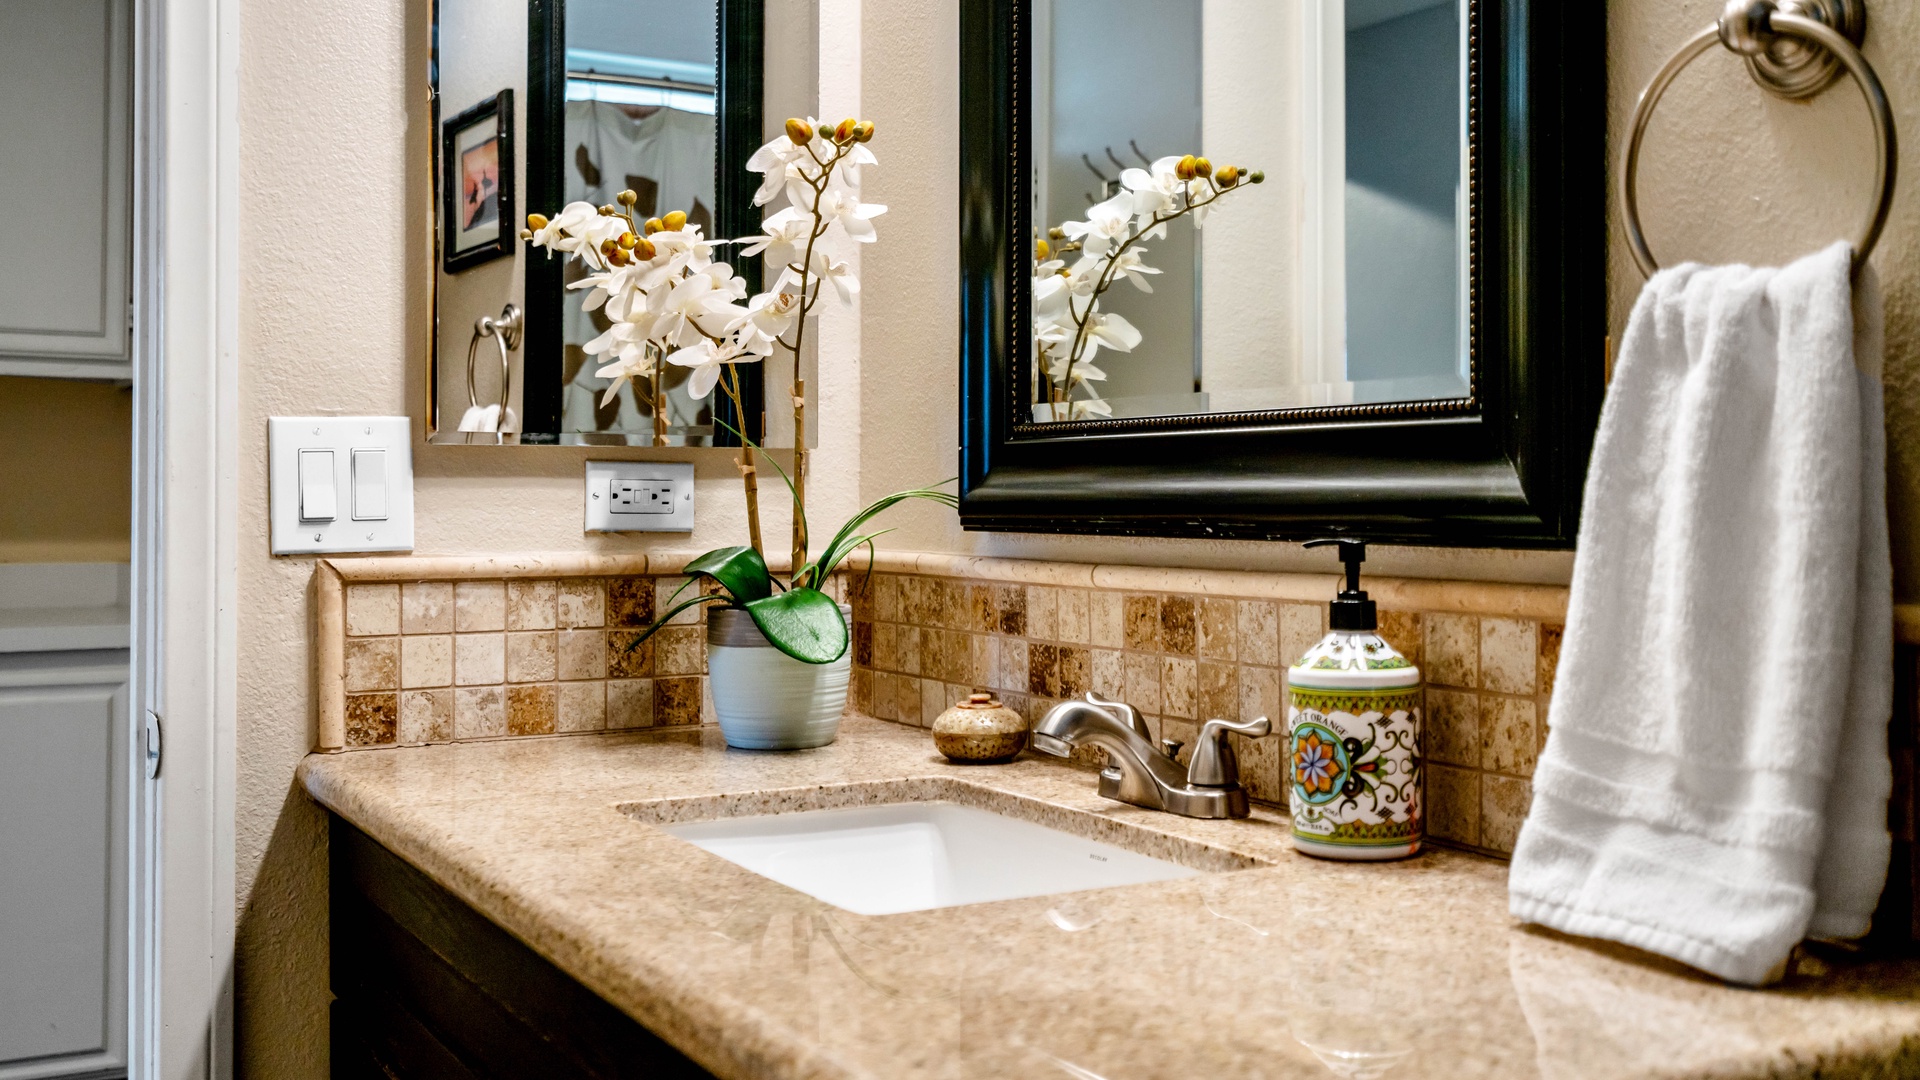 The 2.5 bathrooms are equipped with fresh laundered towels, hand soap, body wash, shampoo, and conditioner.